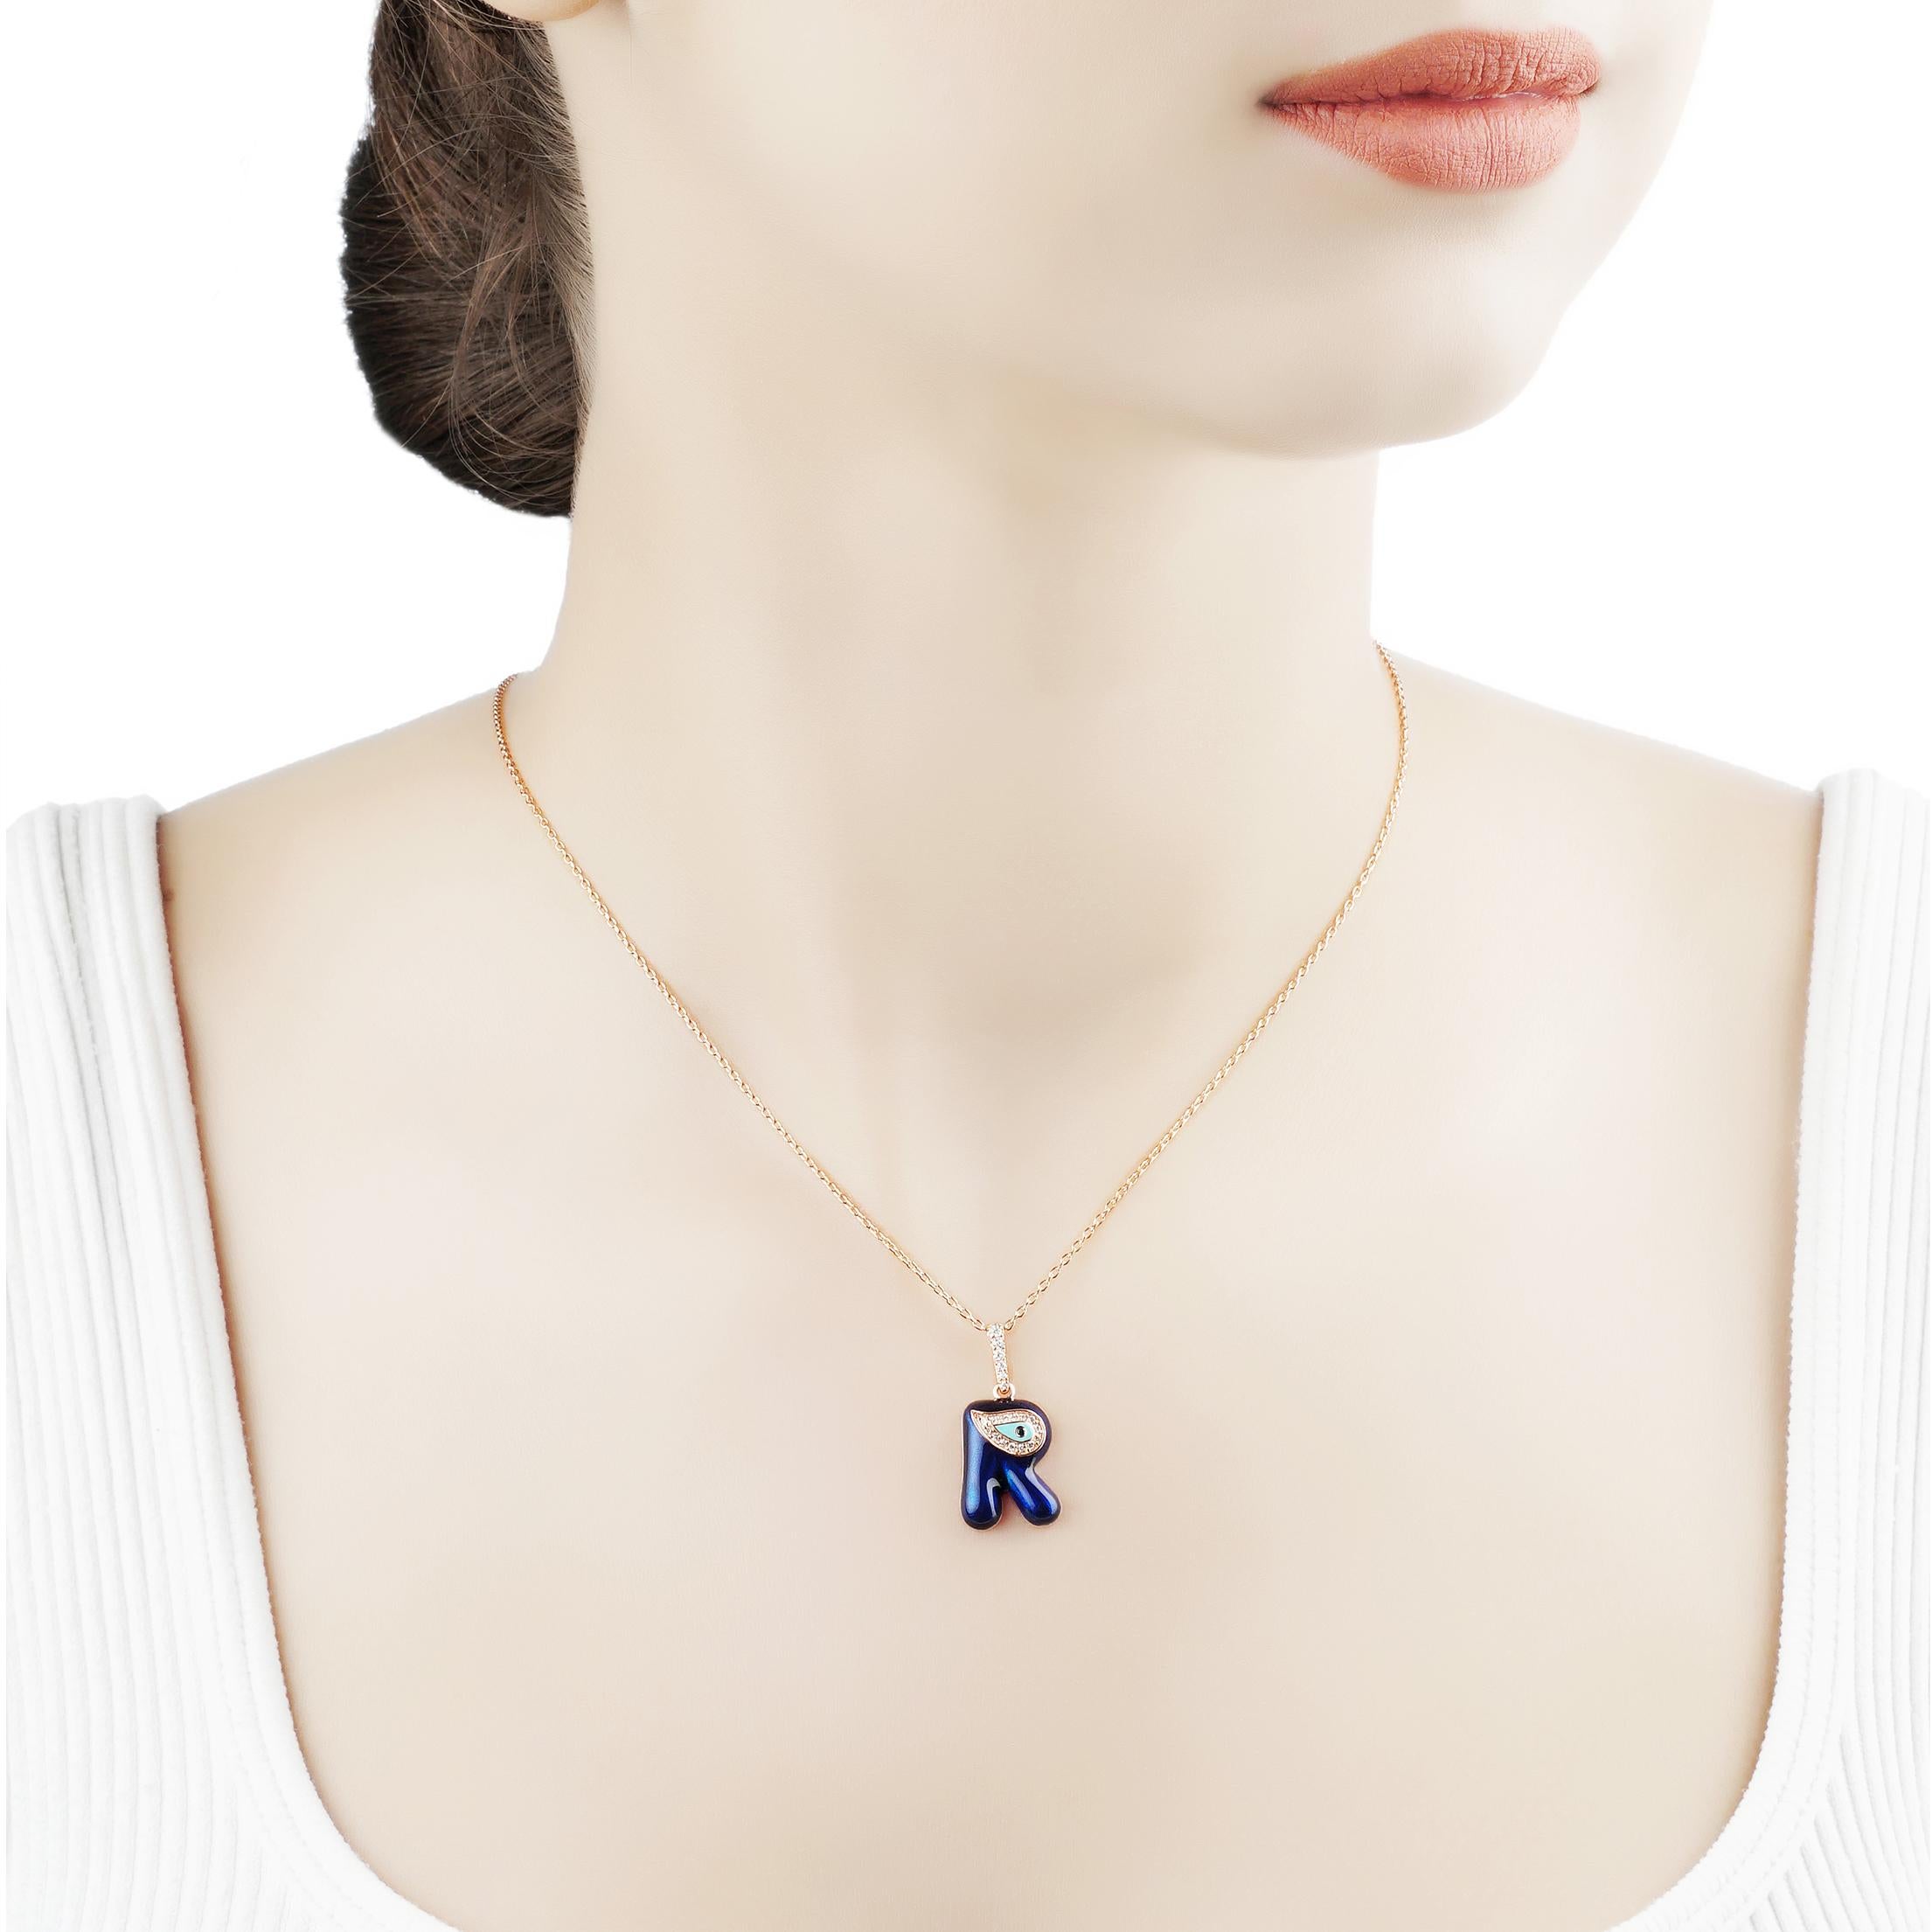 Your Own Personal Evil Eye ID R Letter of Diamonds and Sapphire Necklace by Nazarlique.
A Signature Piece From Our Collection is the Perfect Gift to say Exactly What You Want. 
Personalize Your Jewelry With Your Initials To Tell Your Unique Story.